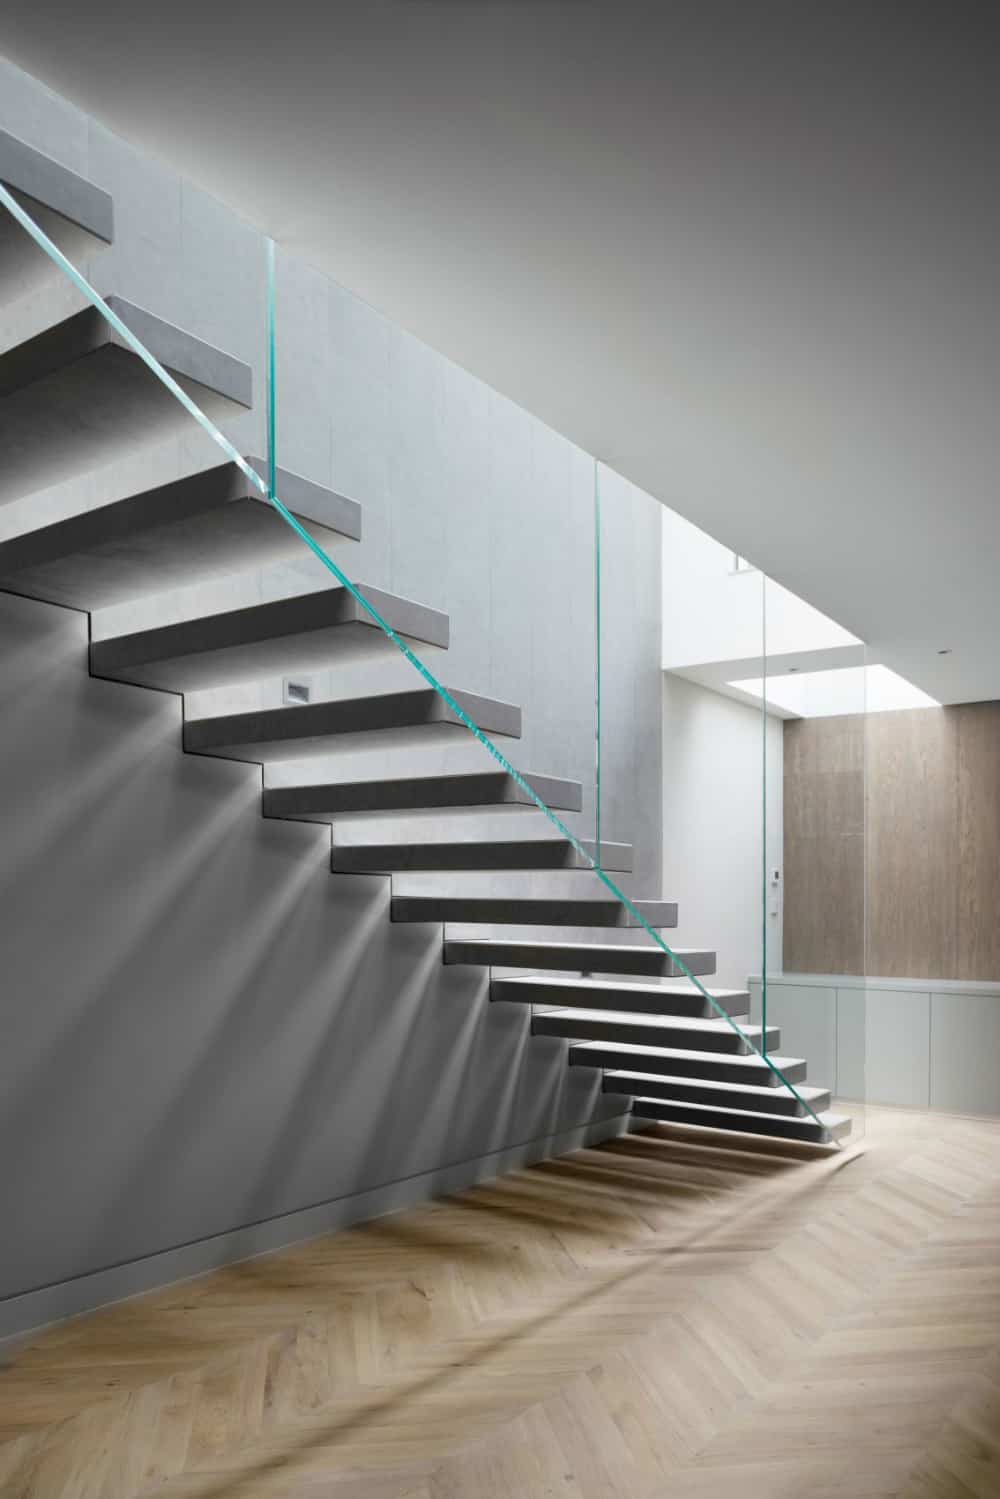 Staircase glass railing leaves the space open and airy